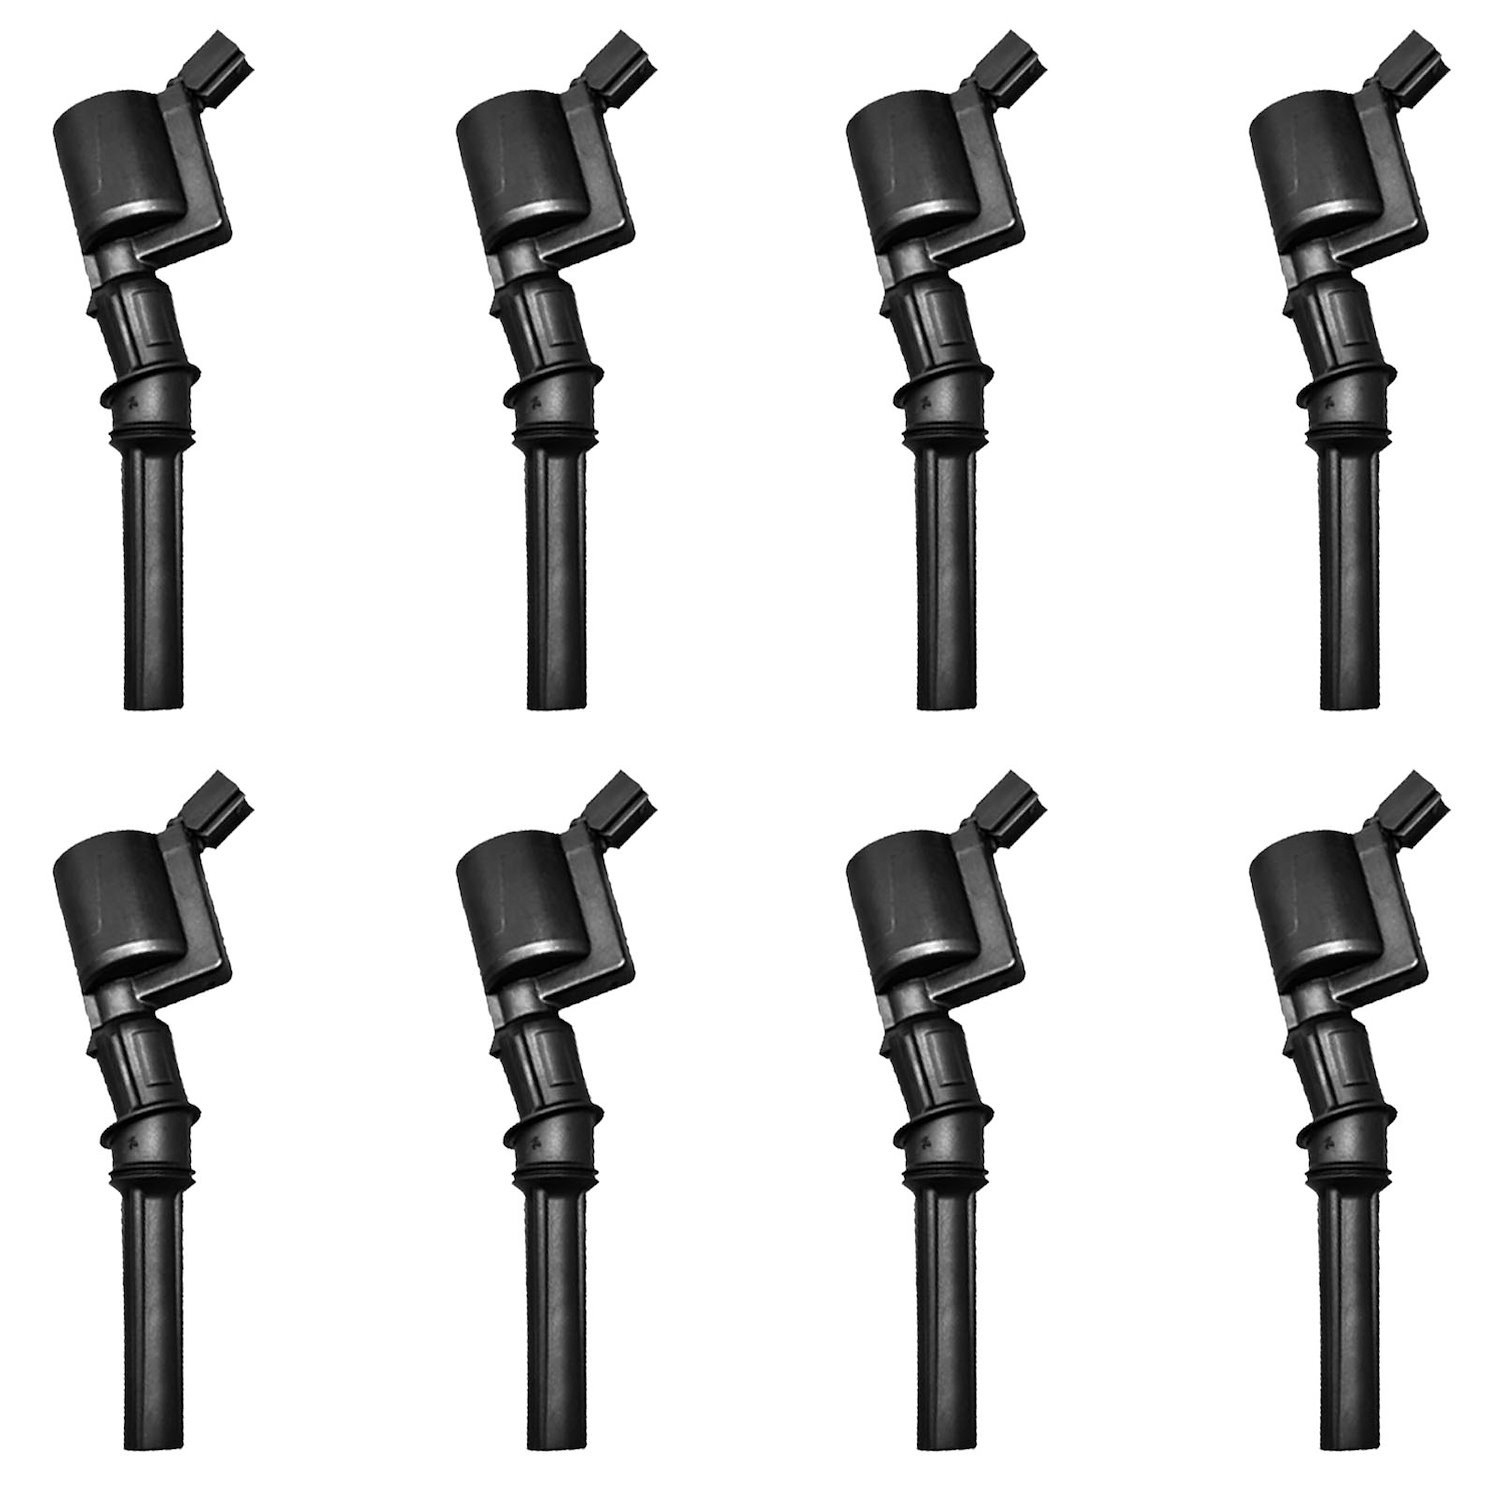 OE Replacement Ignition Coils for 1998-2008 Ford F-150/E-150/Expedition